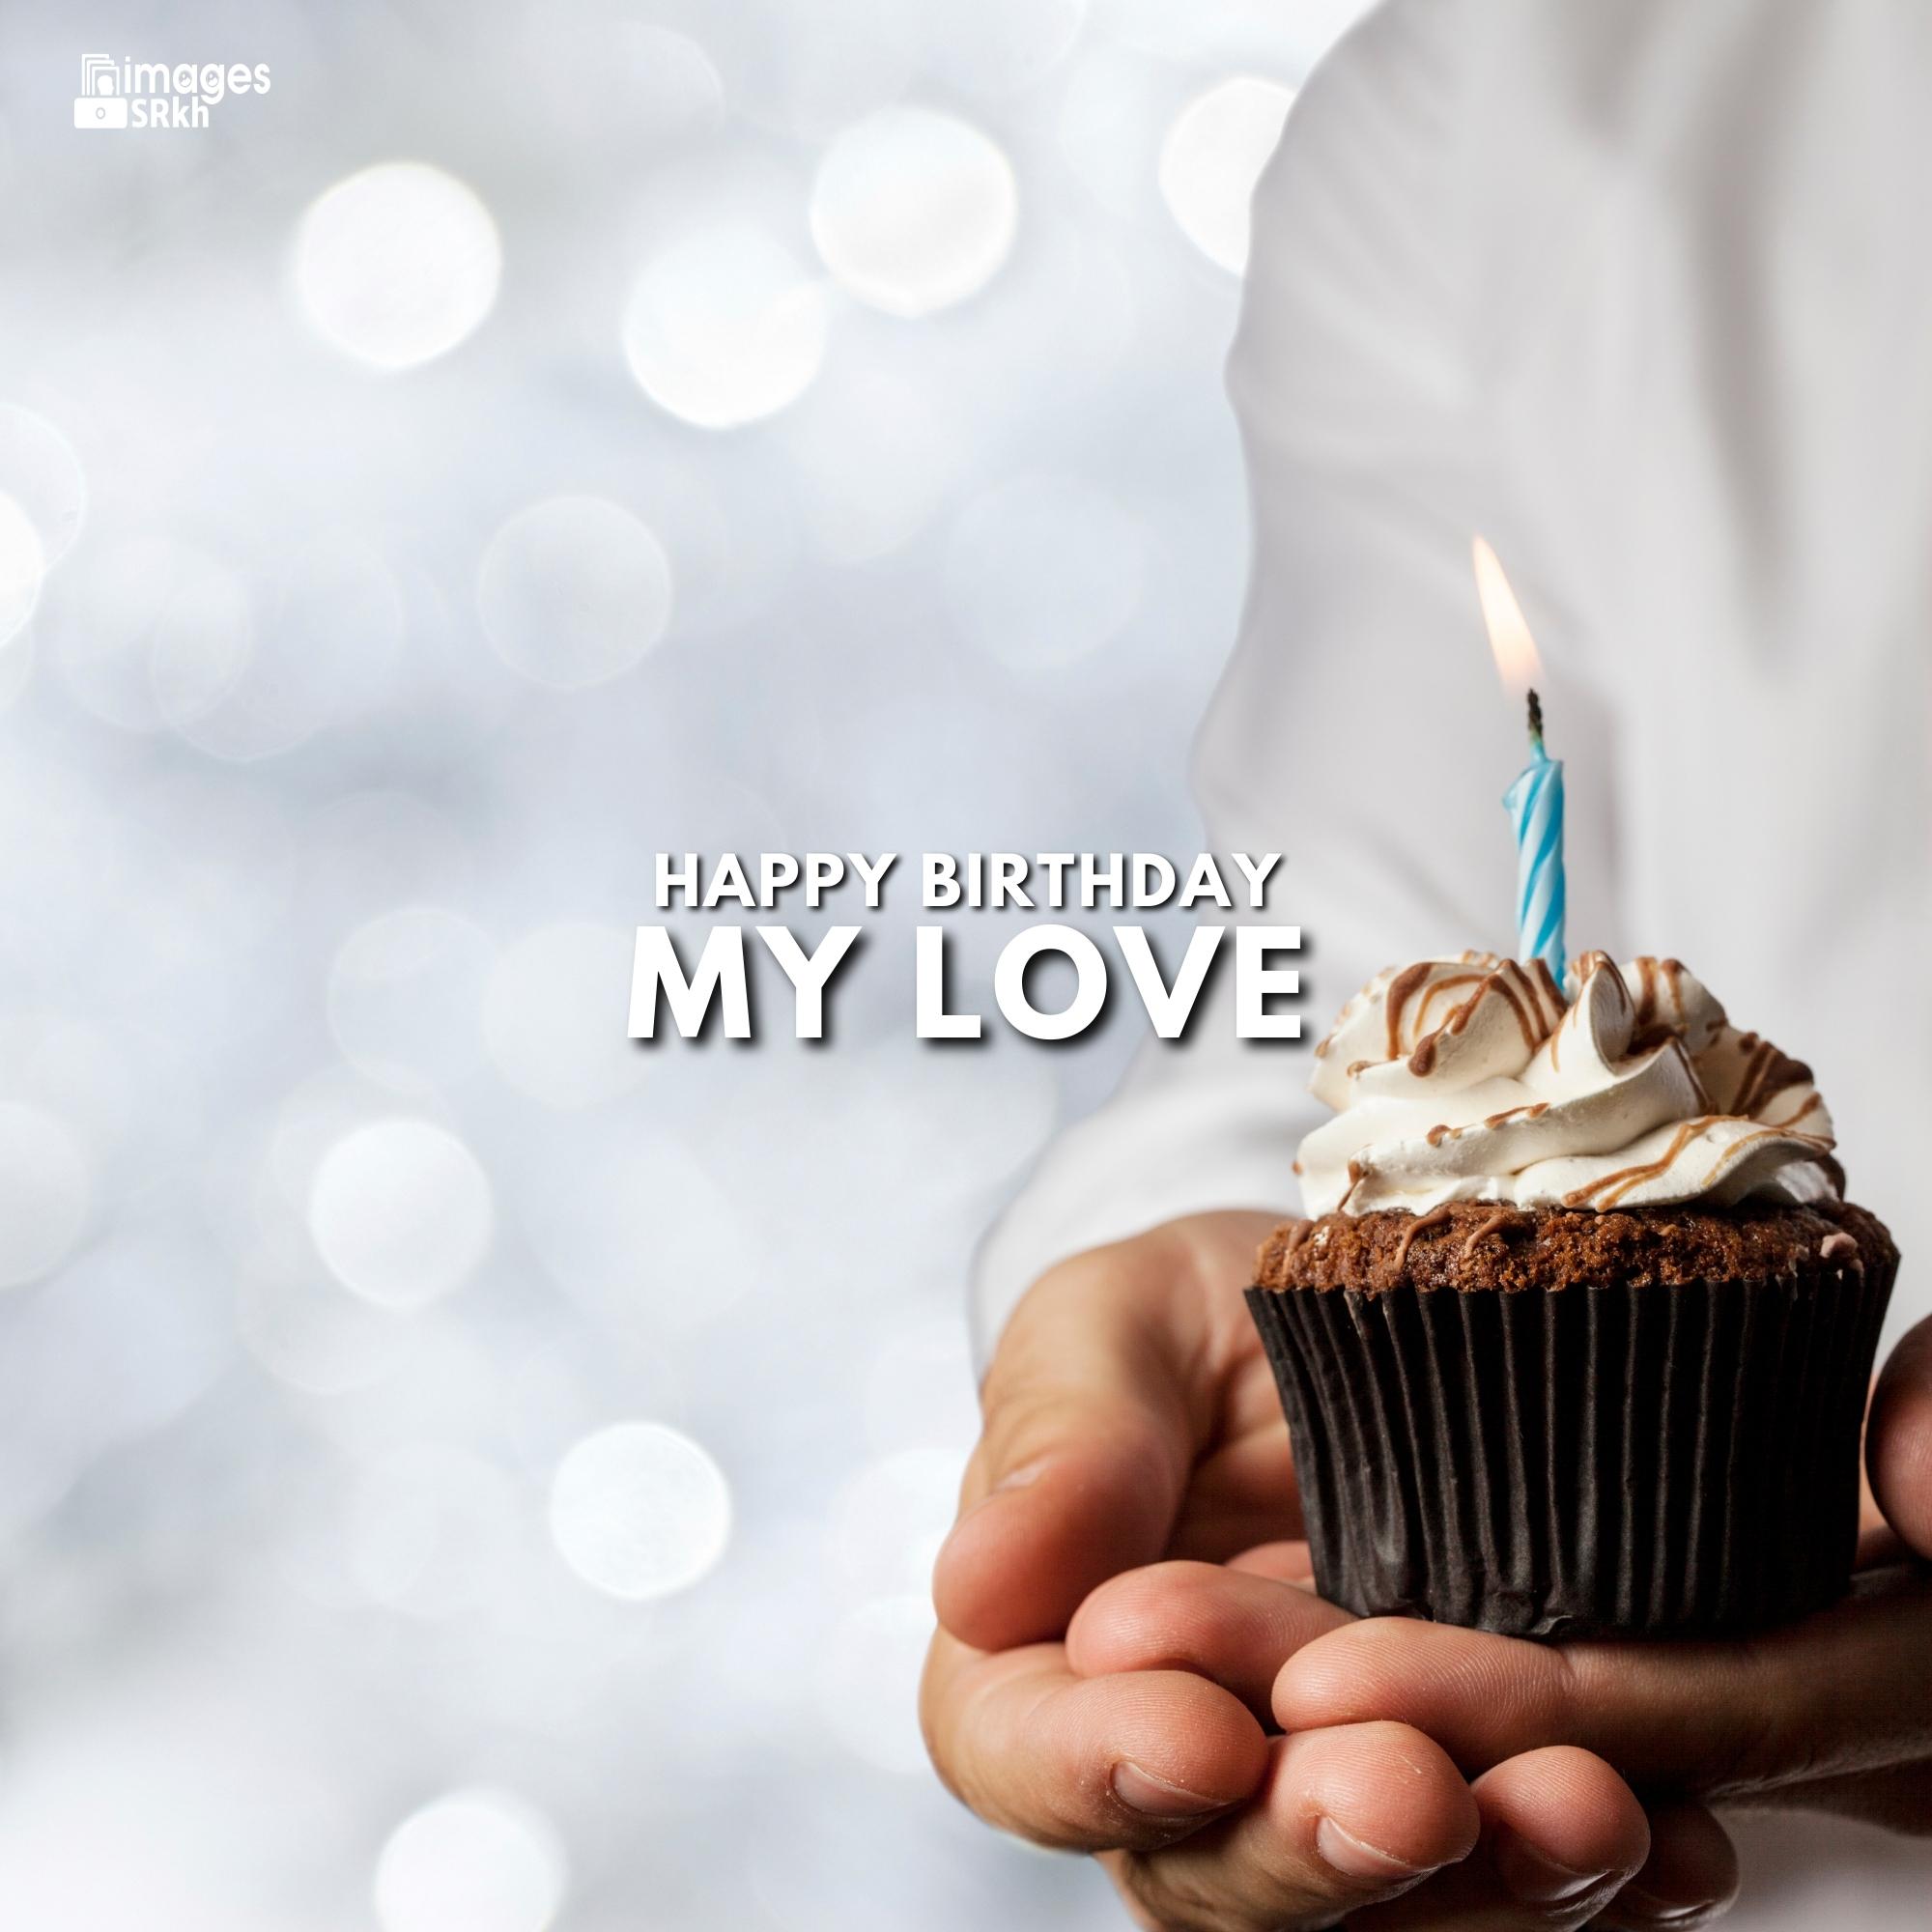 Happy Birthday Images For Lovers Full Hd